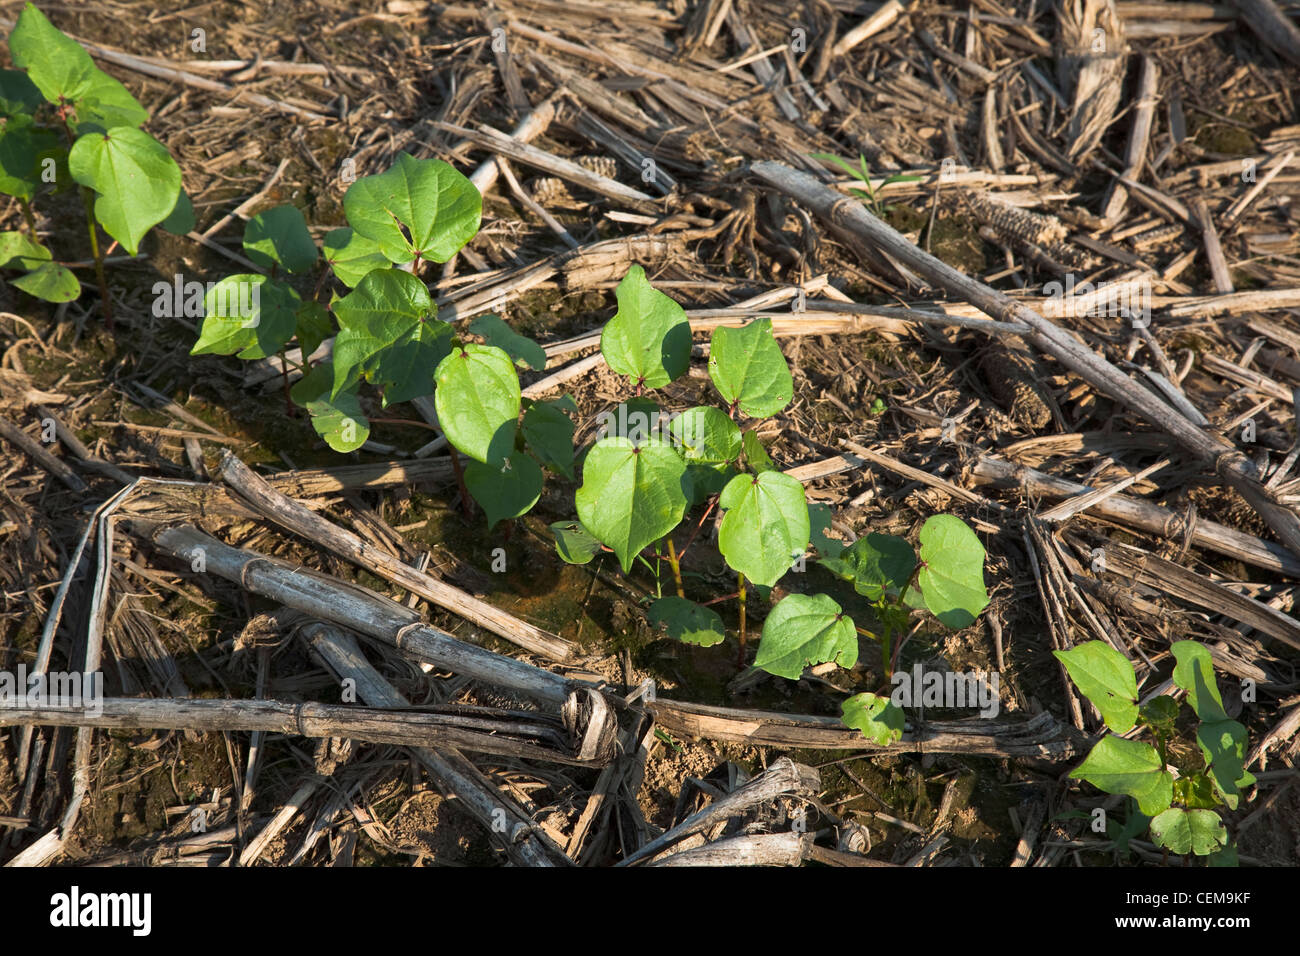 Row of cotton seedlings at the 3-4 true leaf stage, planted no-till in residue of the previous year’s corn crop / Arkansas, USA. Stock Photo